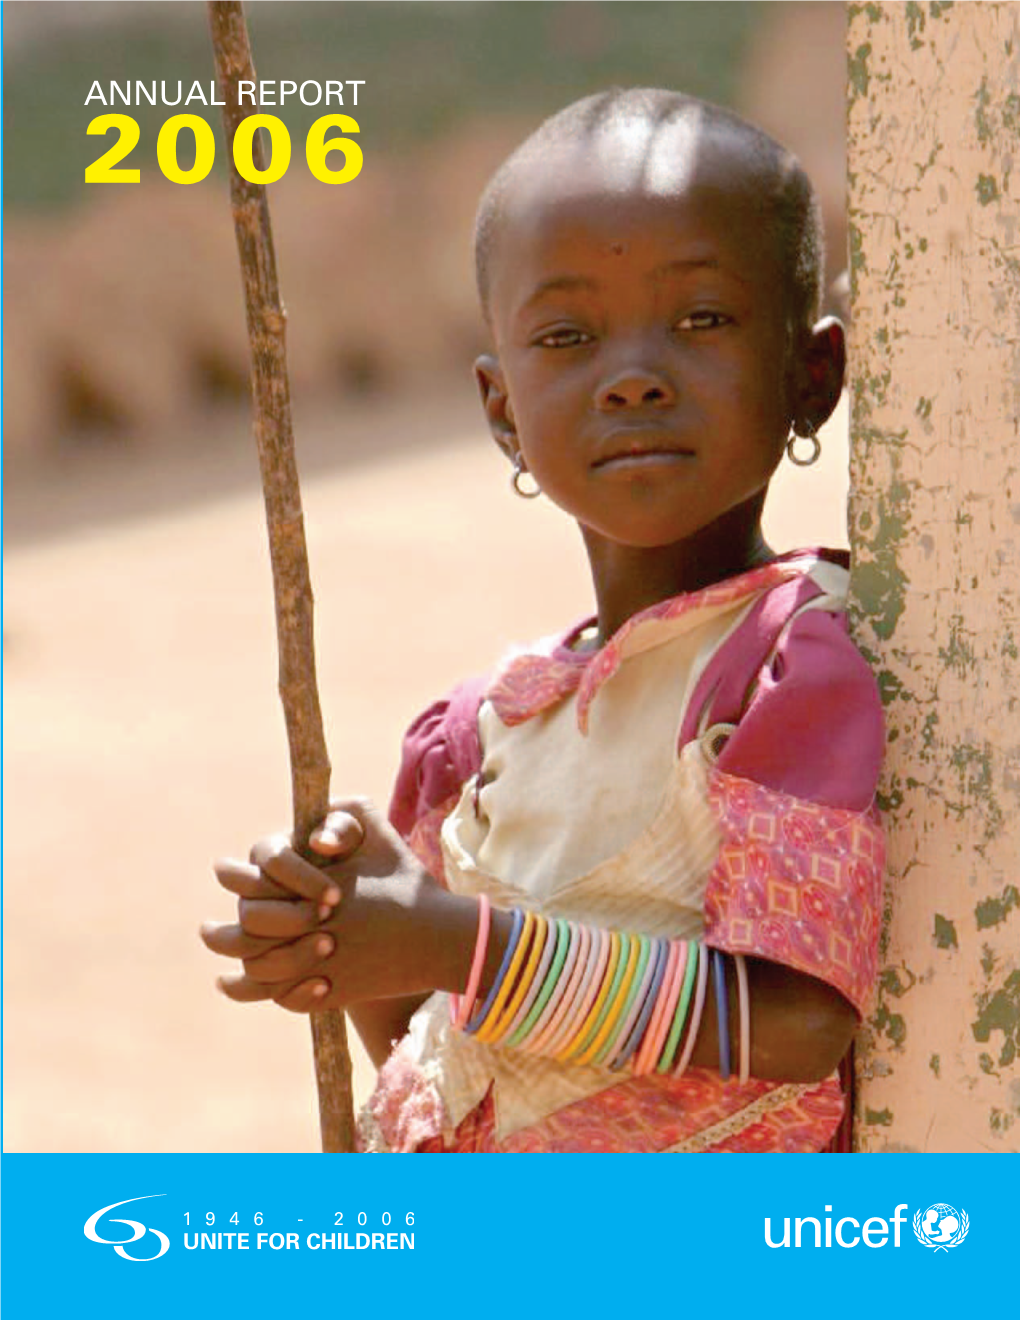 UNICEF ANNUAL REPORT 2006 Covering 1 January 2006 Through 31 December 2006